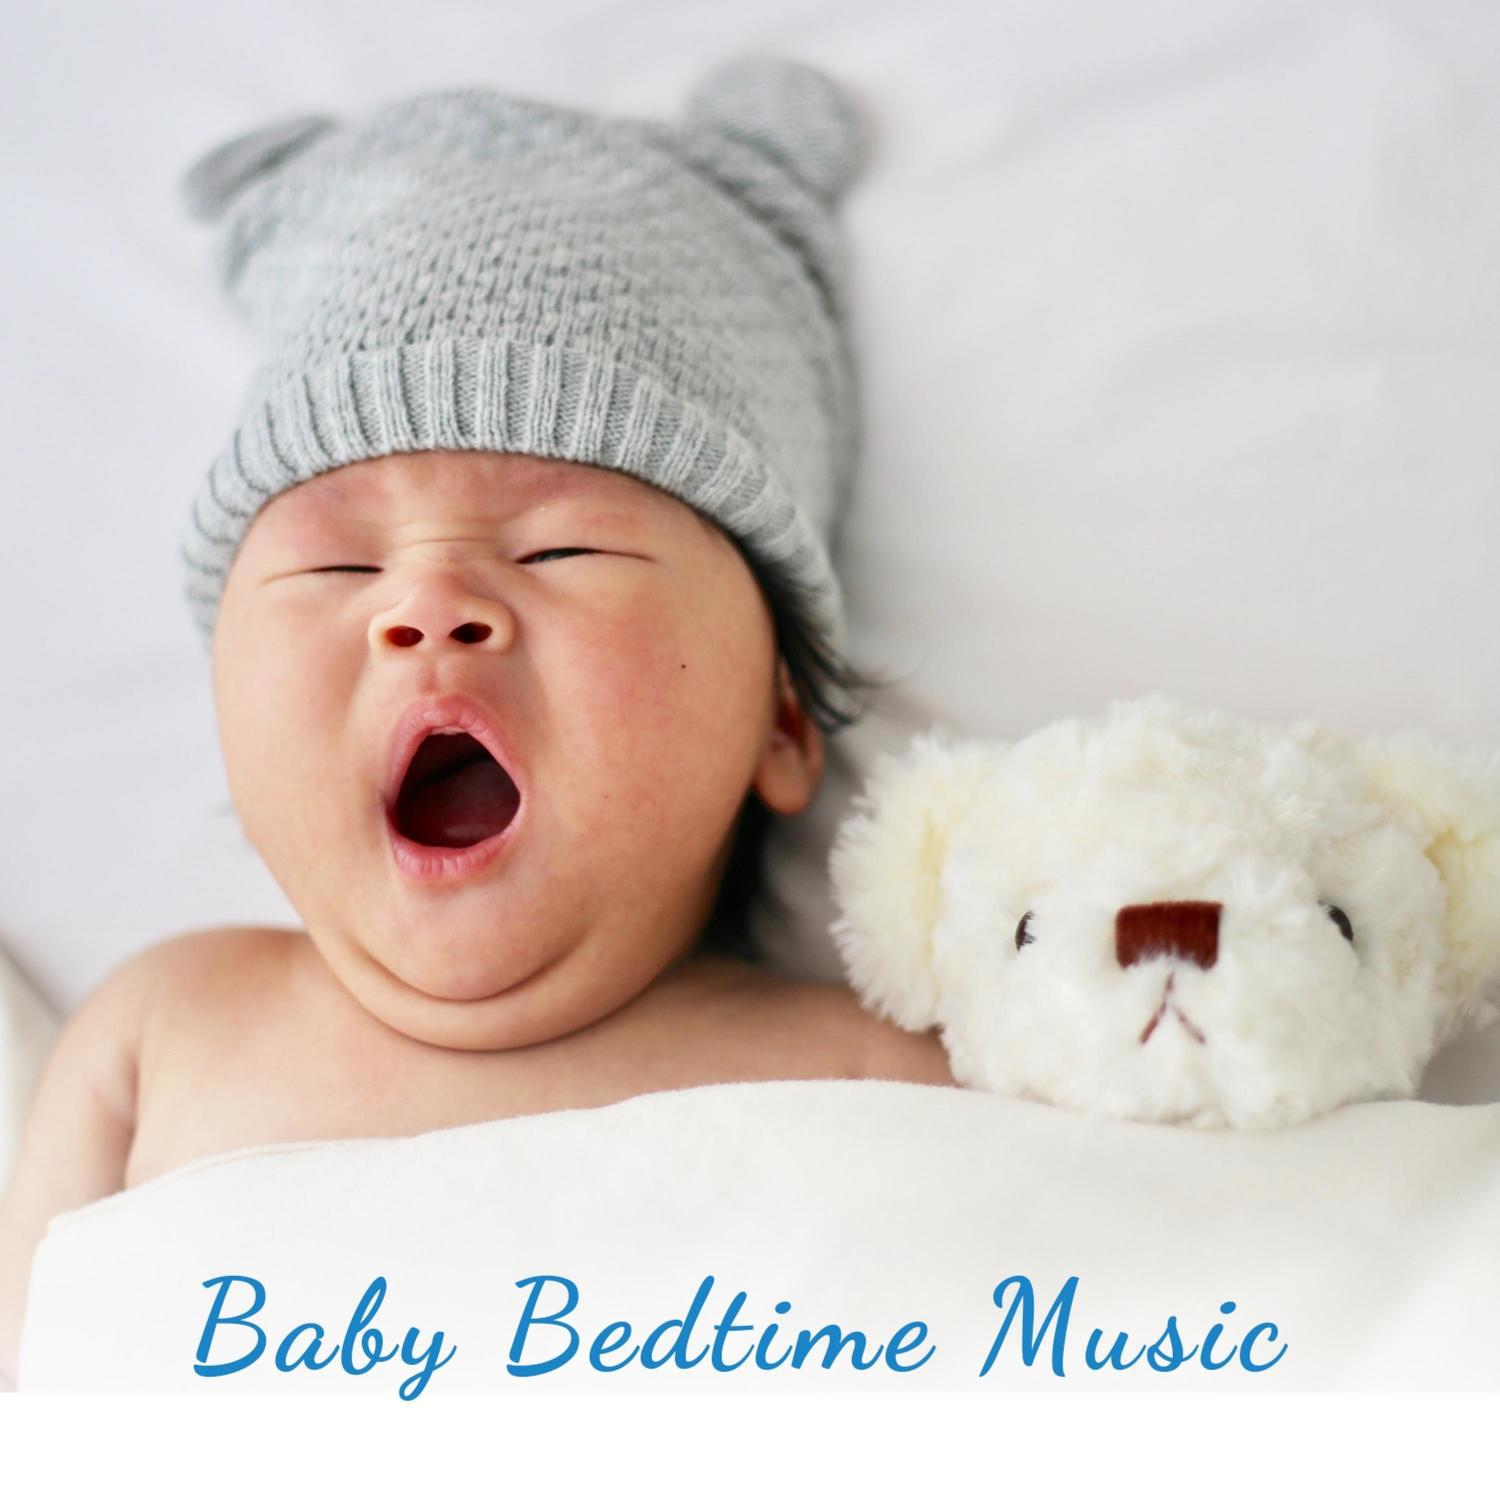 Baby Bedtime Music – Calm Sleep Songs Piano Lullabies for Children, Relaxing Nature Sounds and White Noise for Newborn